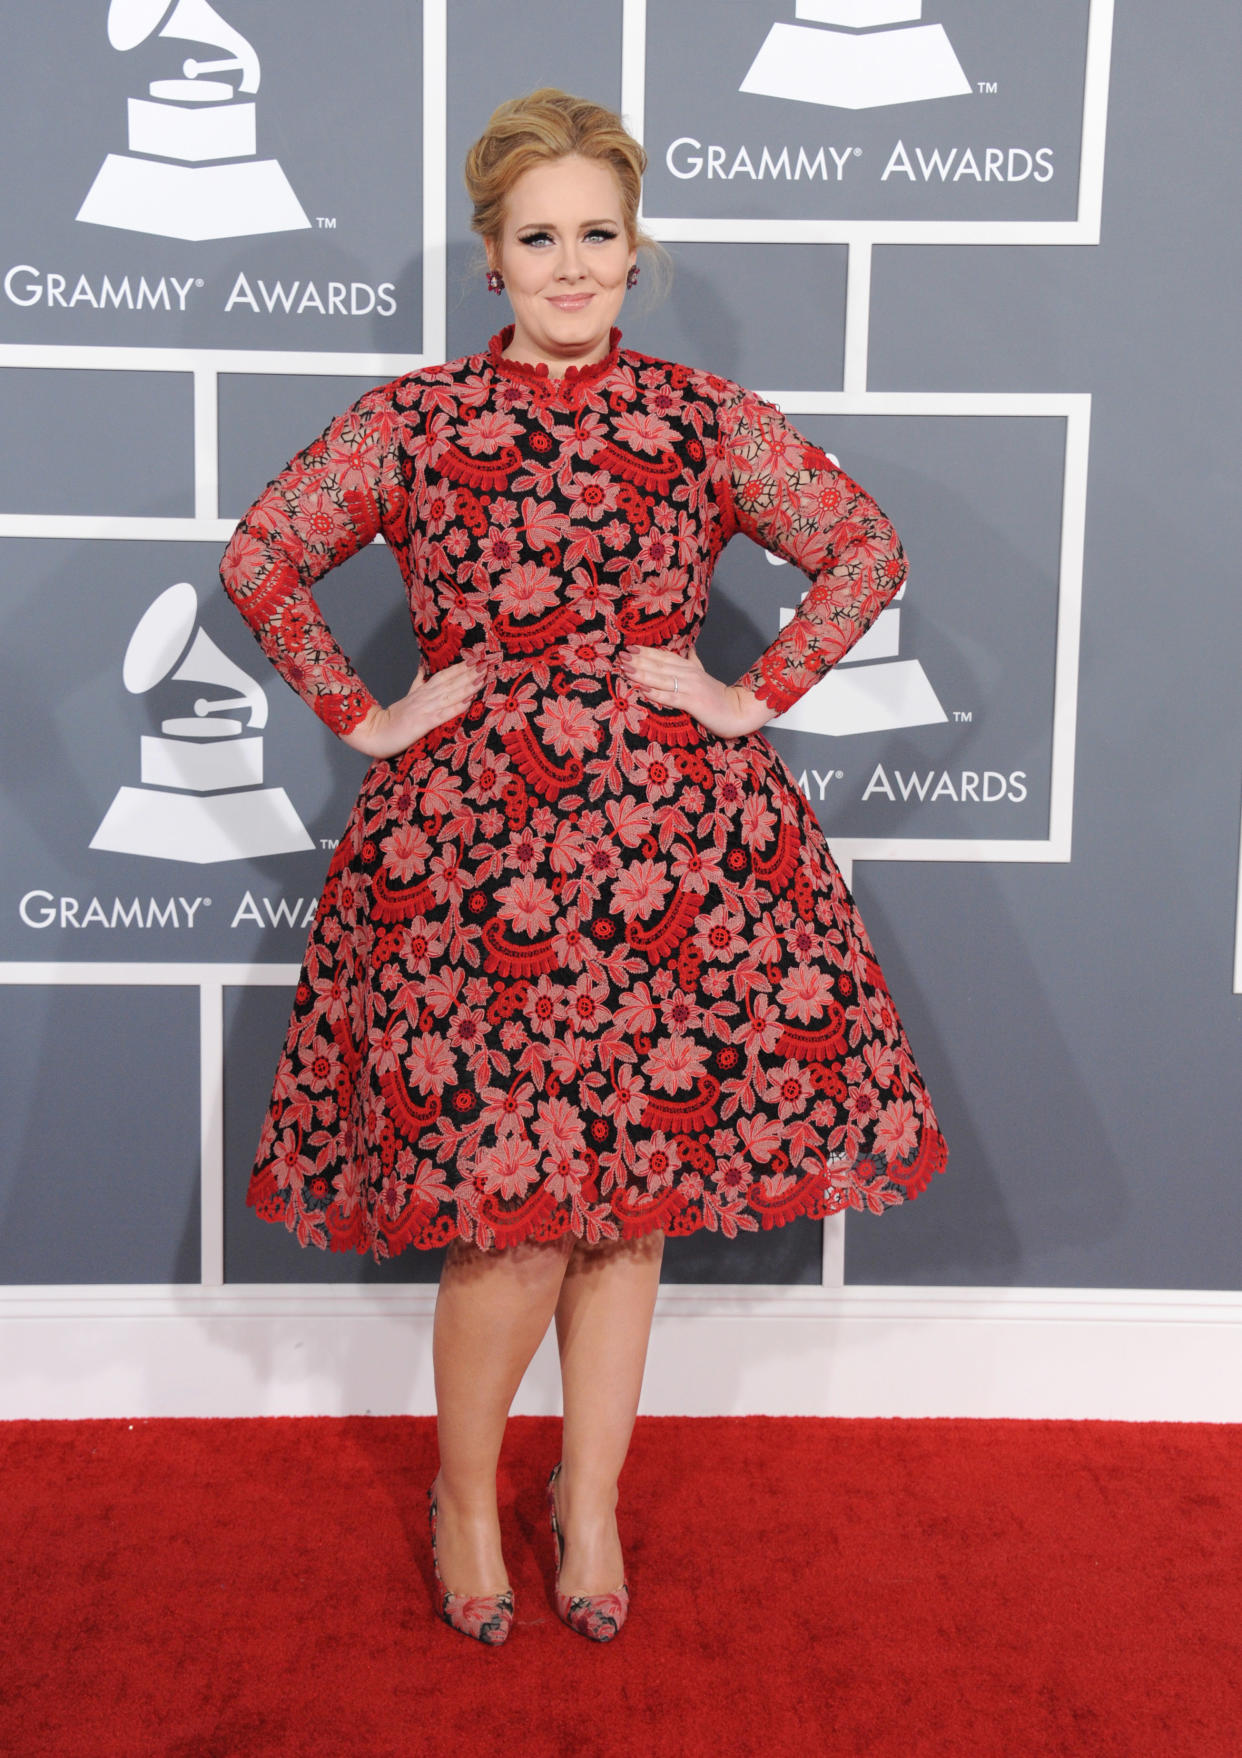 Adele at the Grammy Awards in 2013. (Photo: Invision/AP)